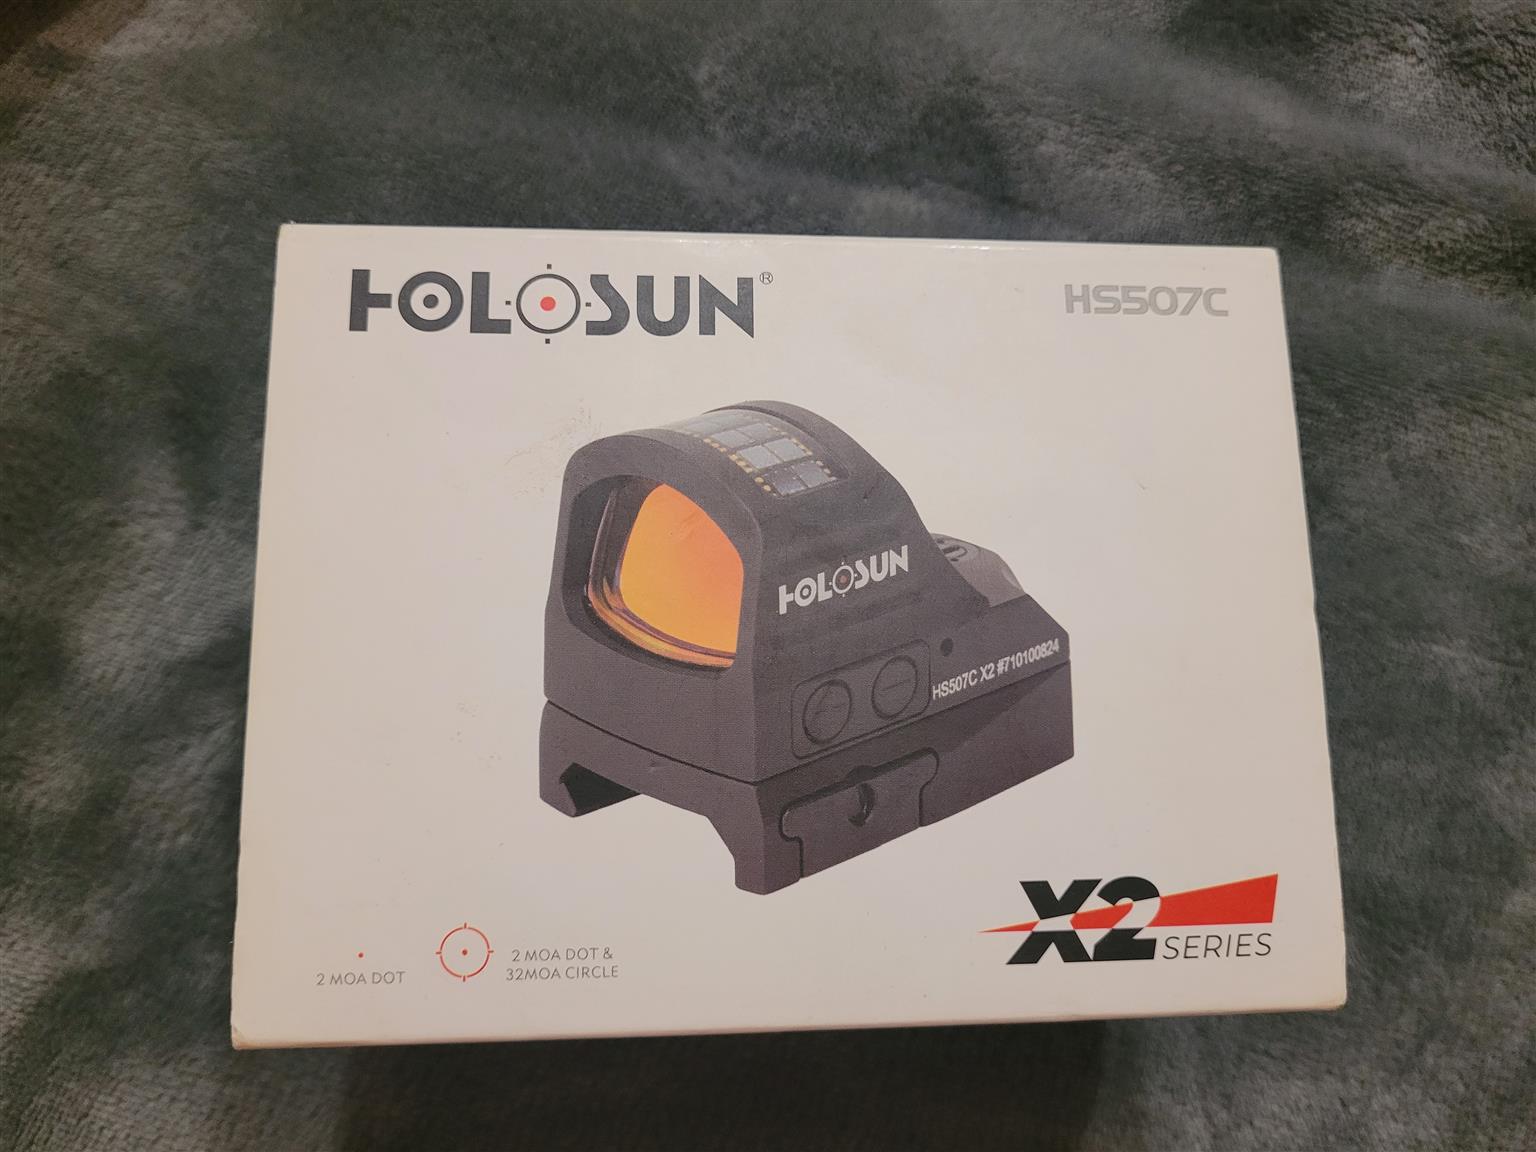 Holosun 507c for sale.  Like new